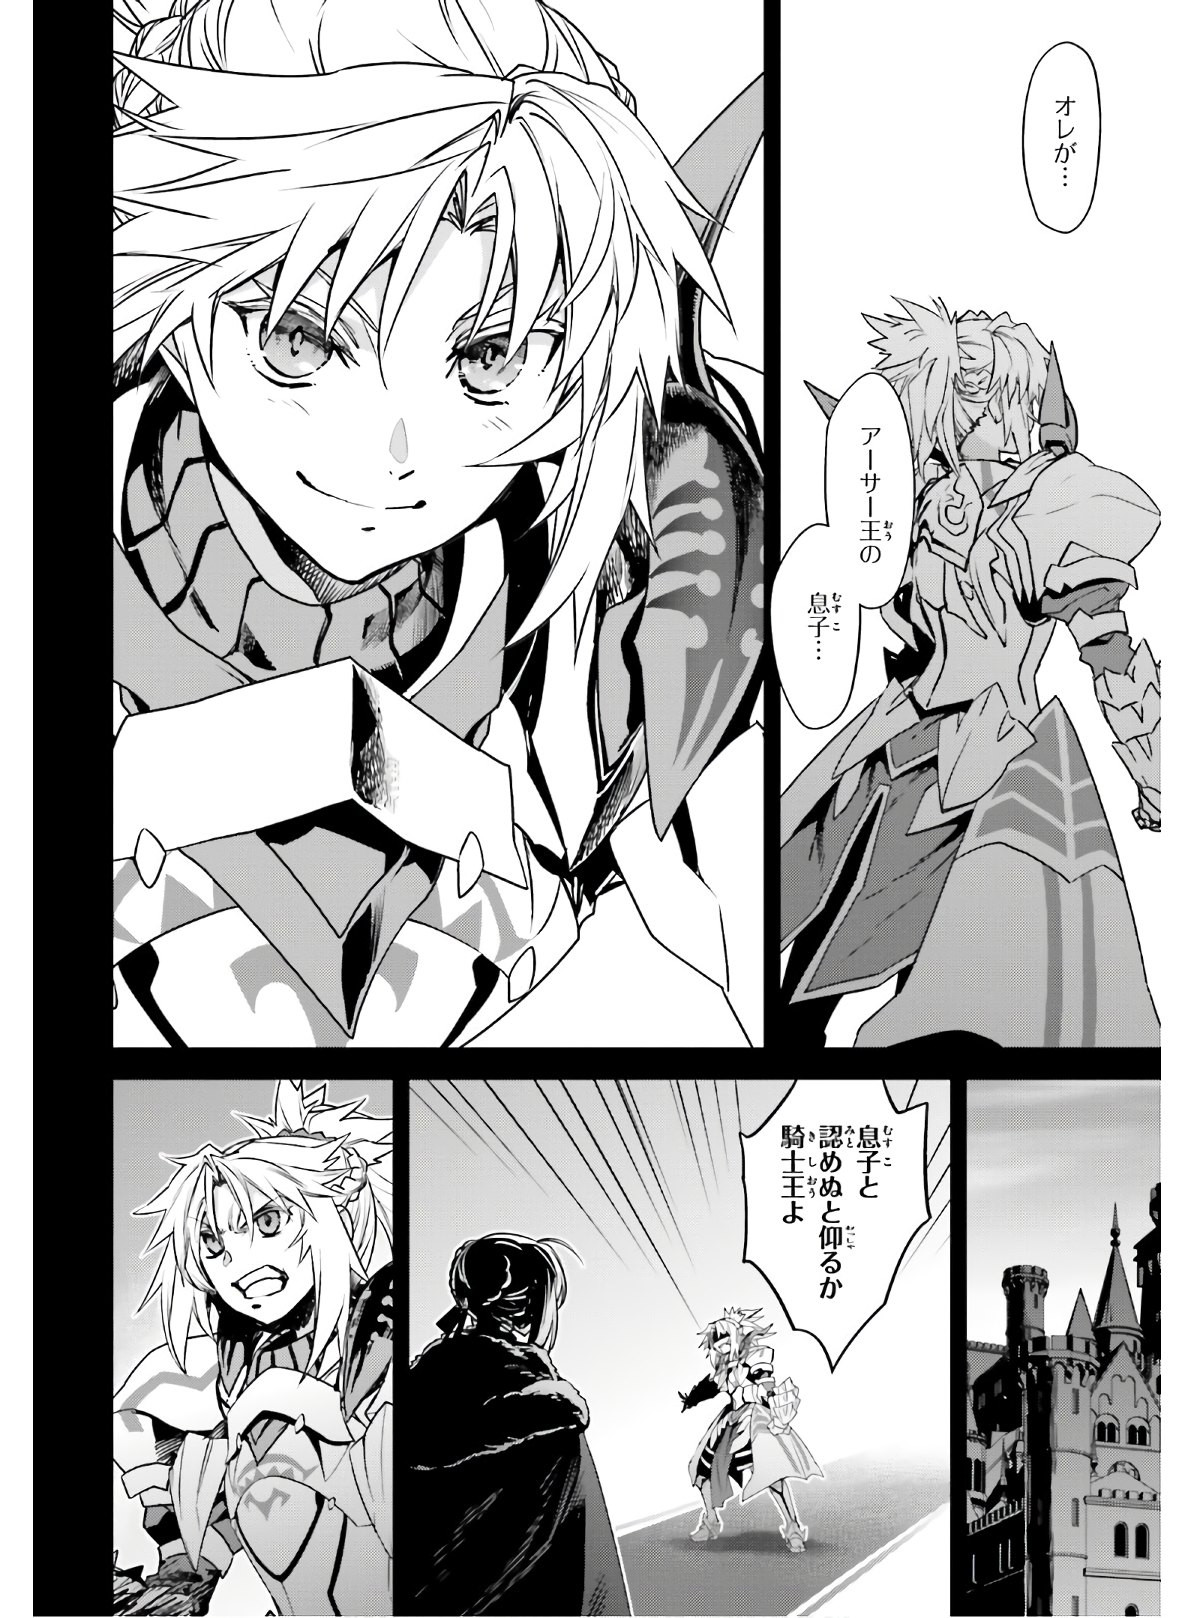 Fate-Apocrypha - Chapter 42 - Page 8